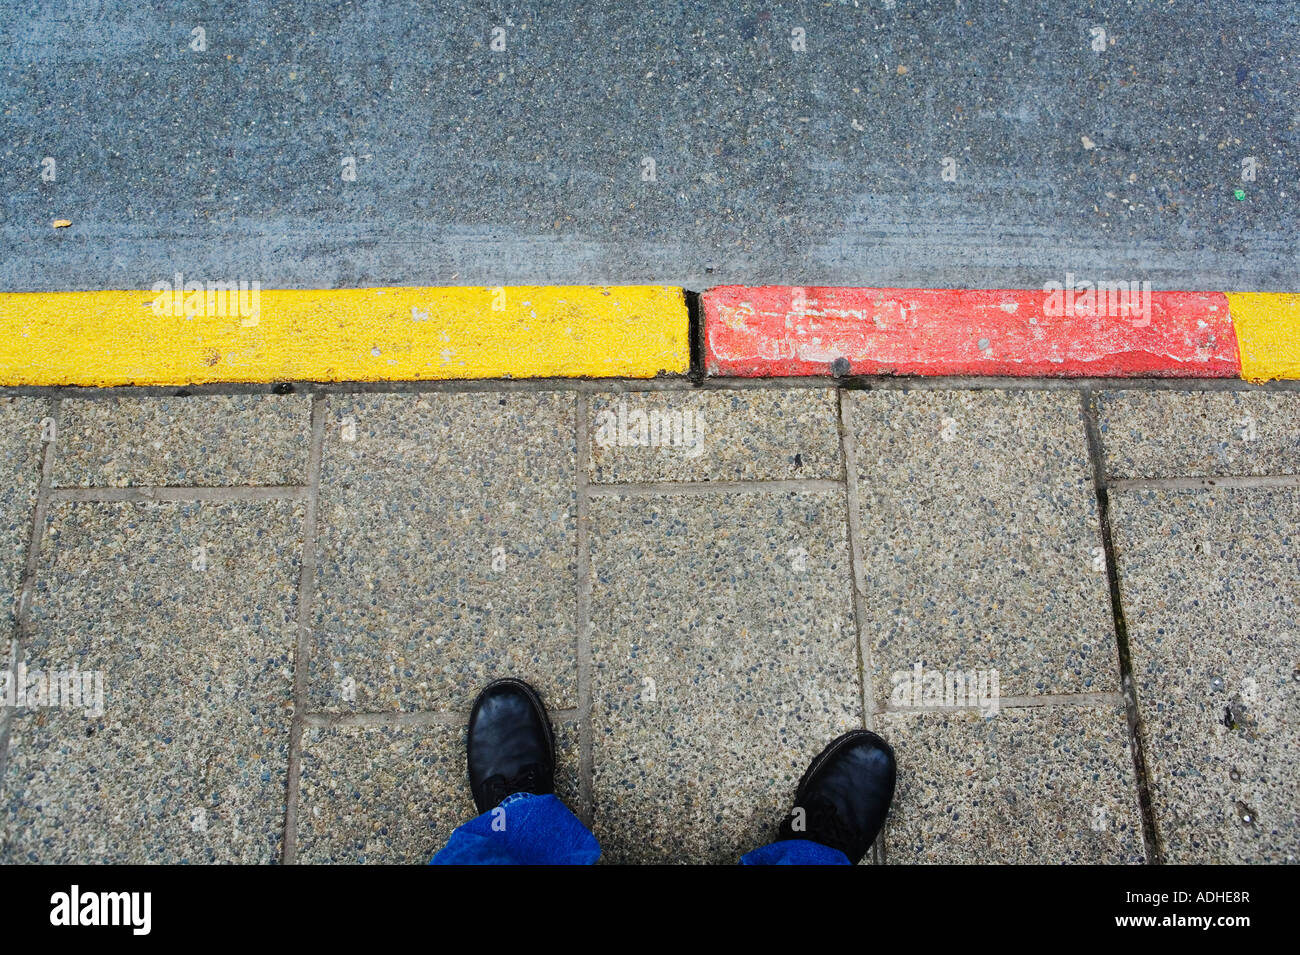 Feet and bus stop curb painted red and yellow Stock Photo